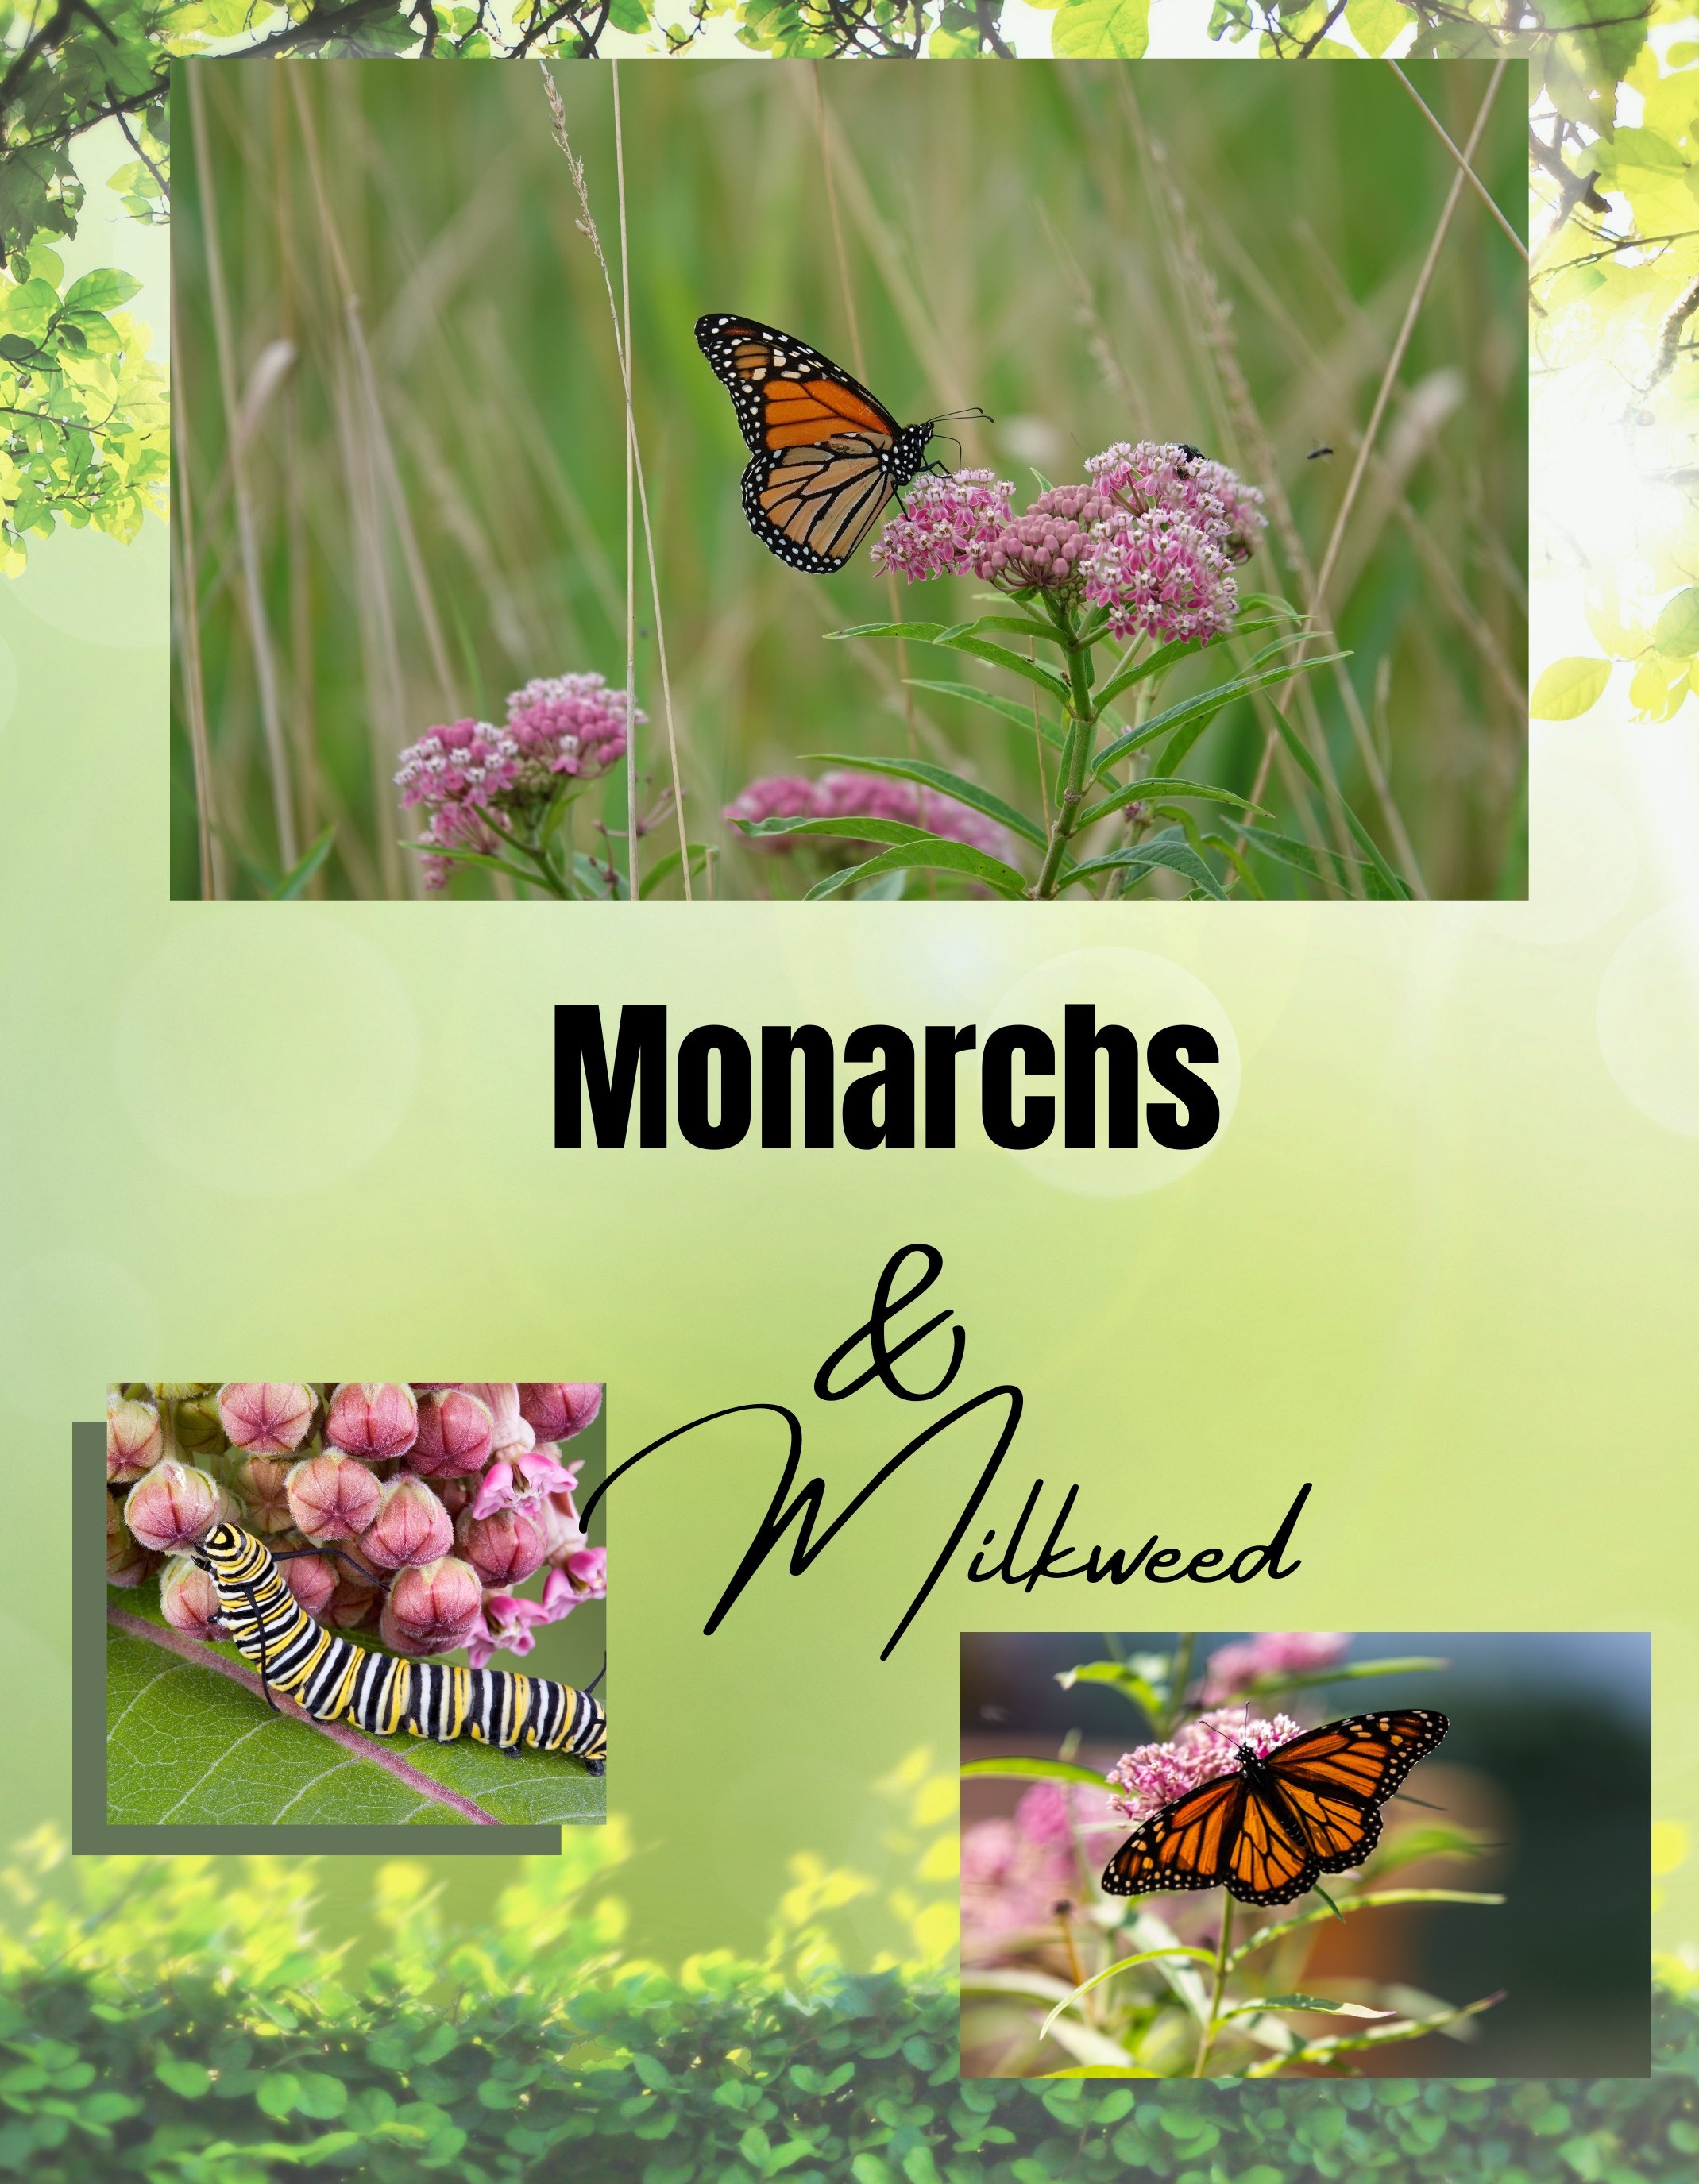 The monarch and the milkweed